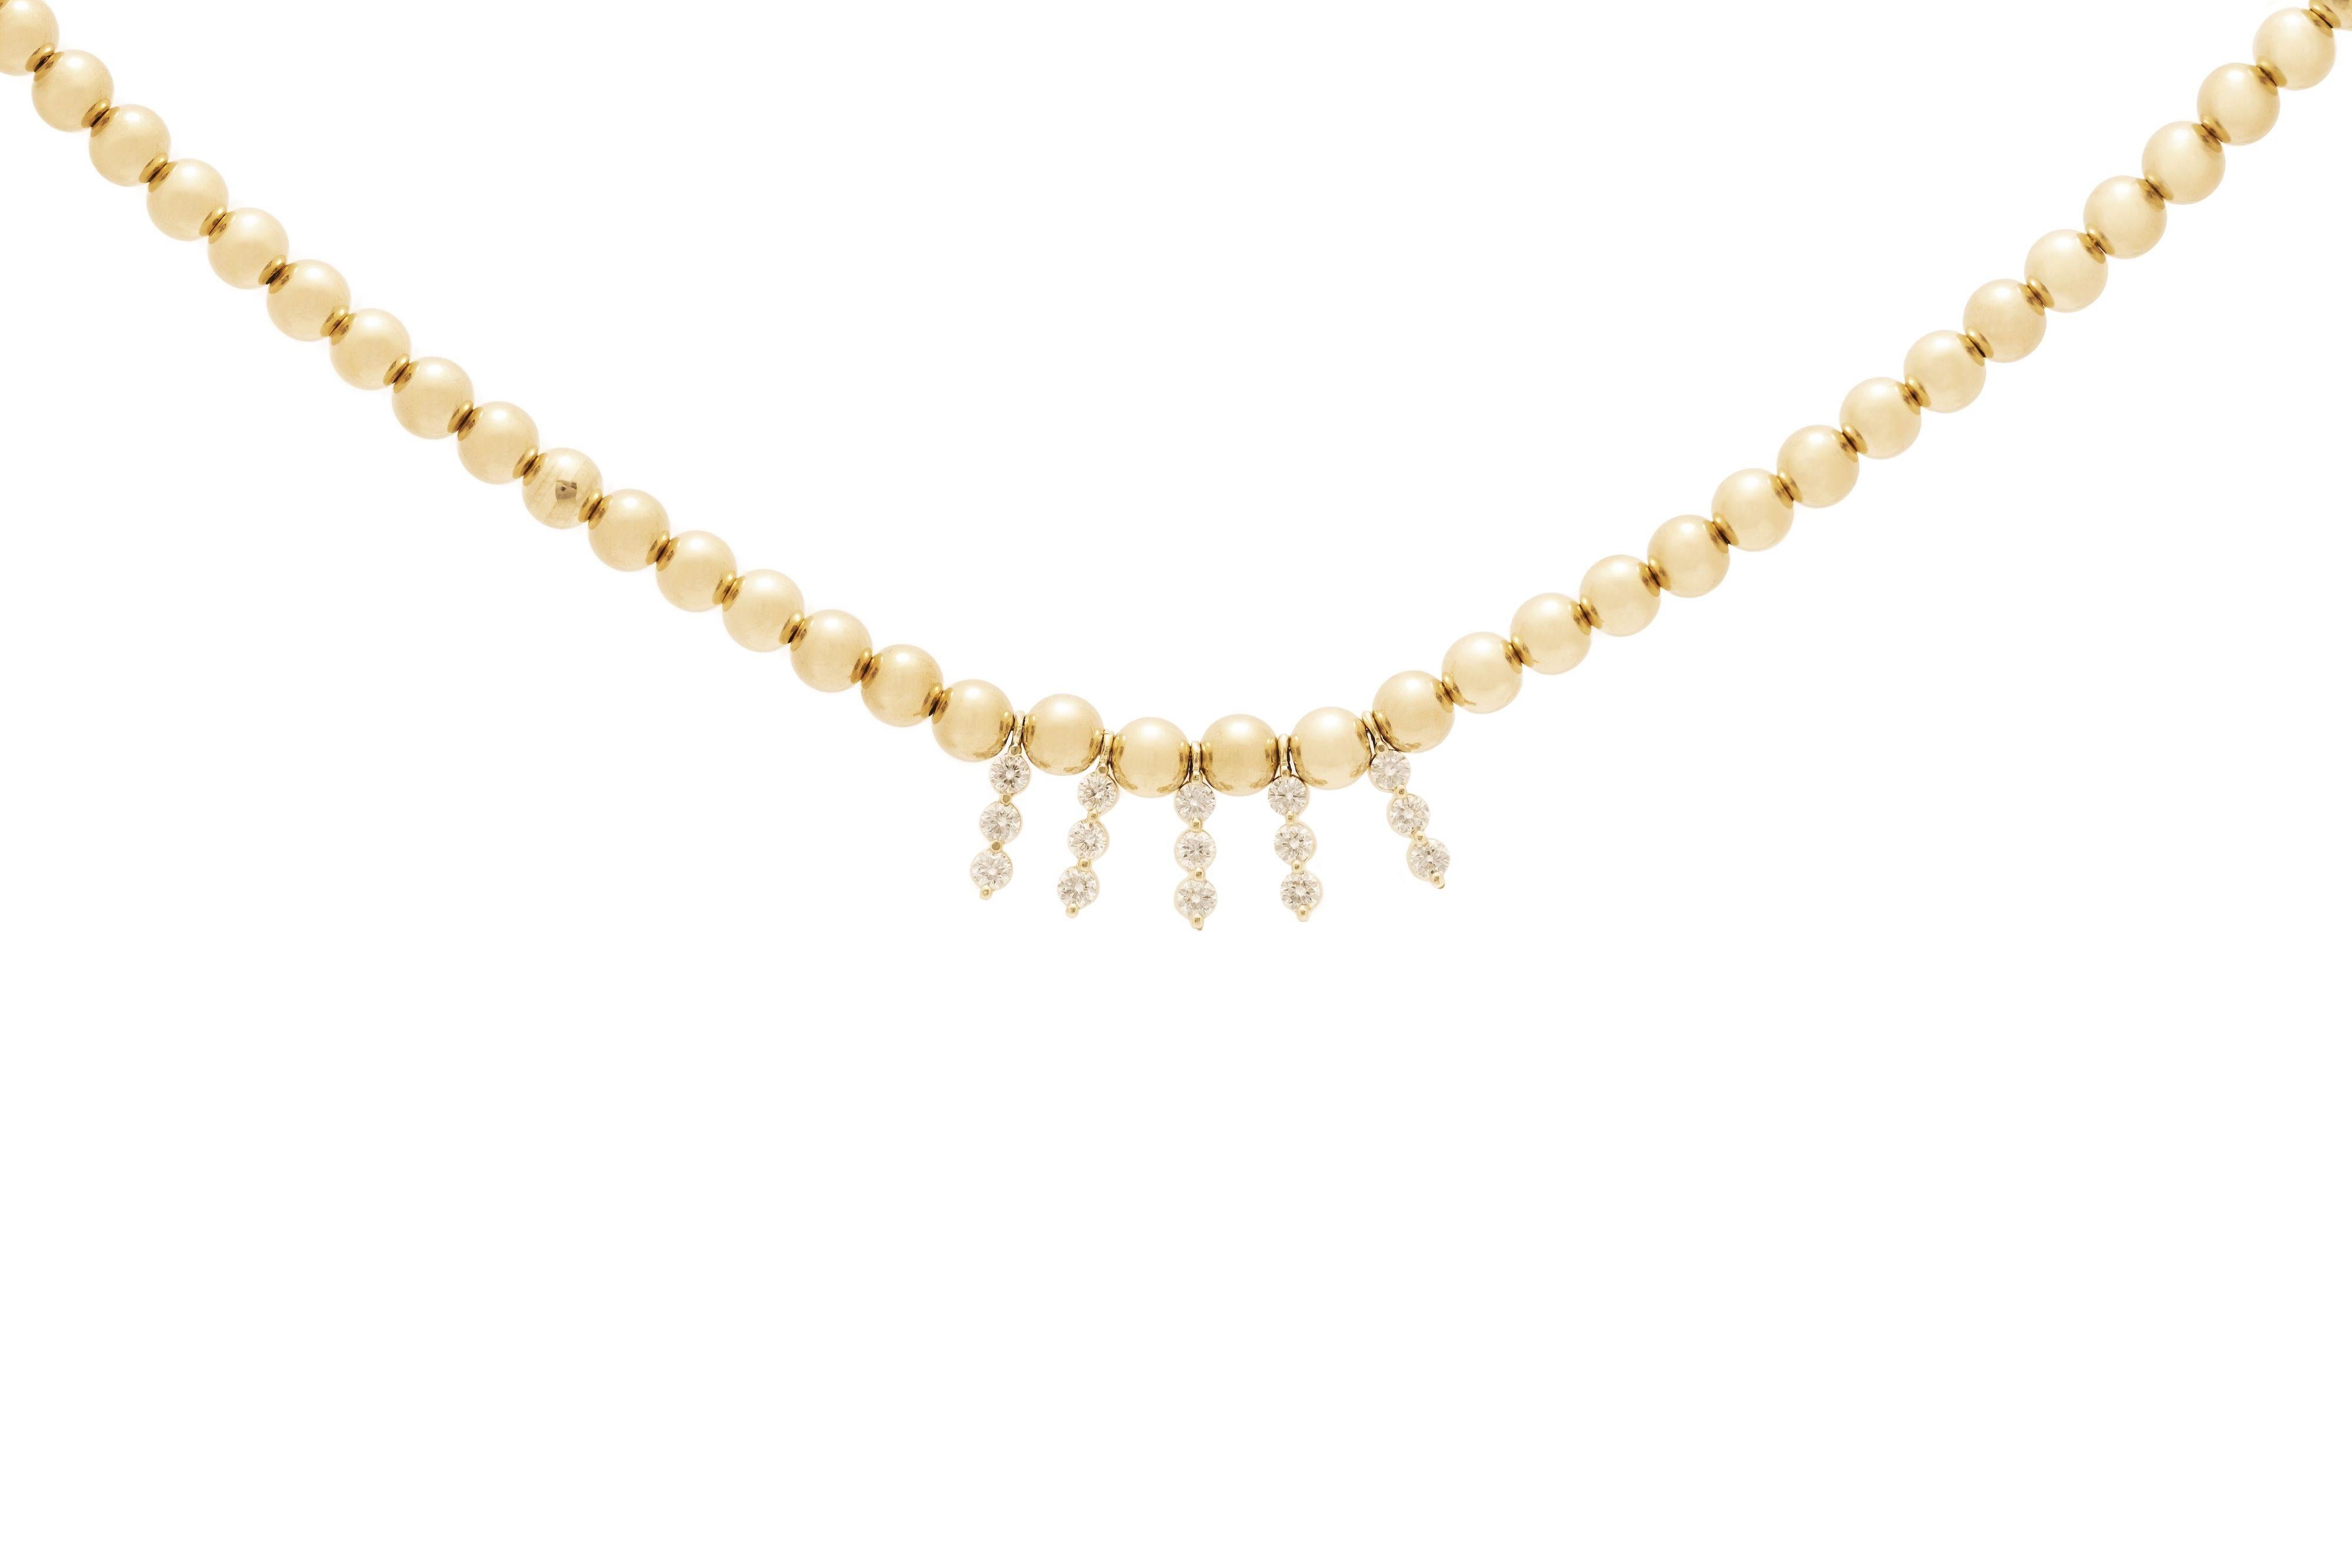 This detailed design comprising an enduring gold chain with vibrant gold beads and five impeccable diamond sticks will indisputably make you gleam with sophistication and style, both in your comfort zone at home and when you grace the town in your